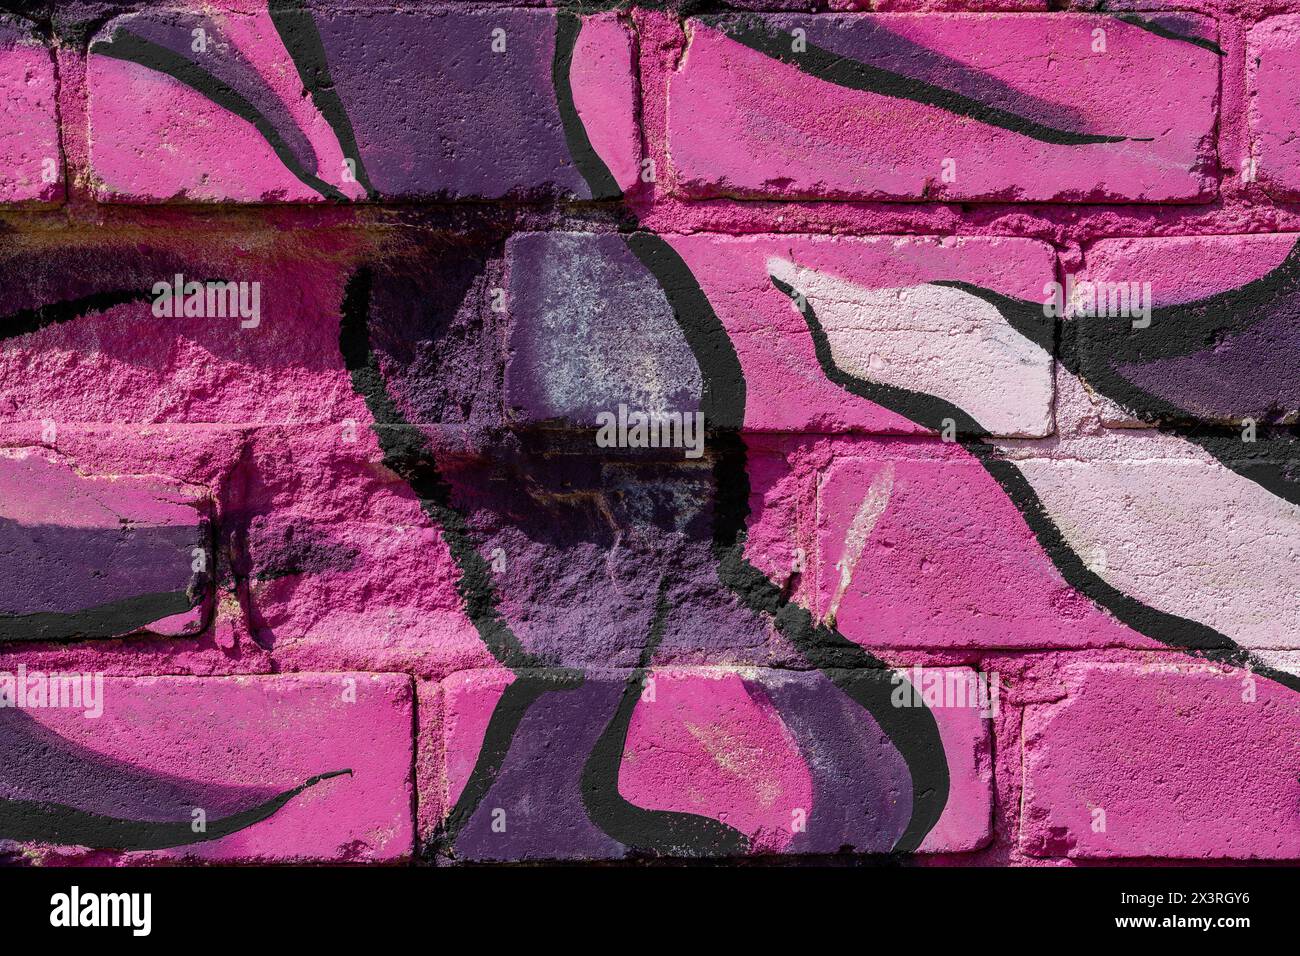 The texture of a pink brick wall painted with different-toned pink and purple patterns. Stock Photo